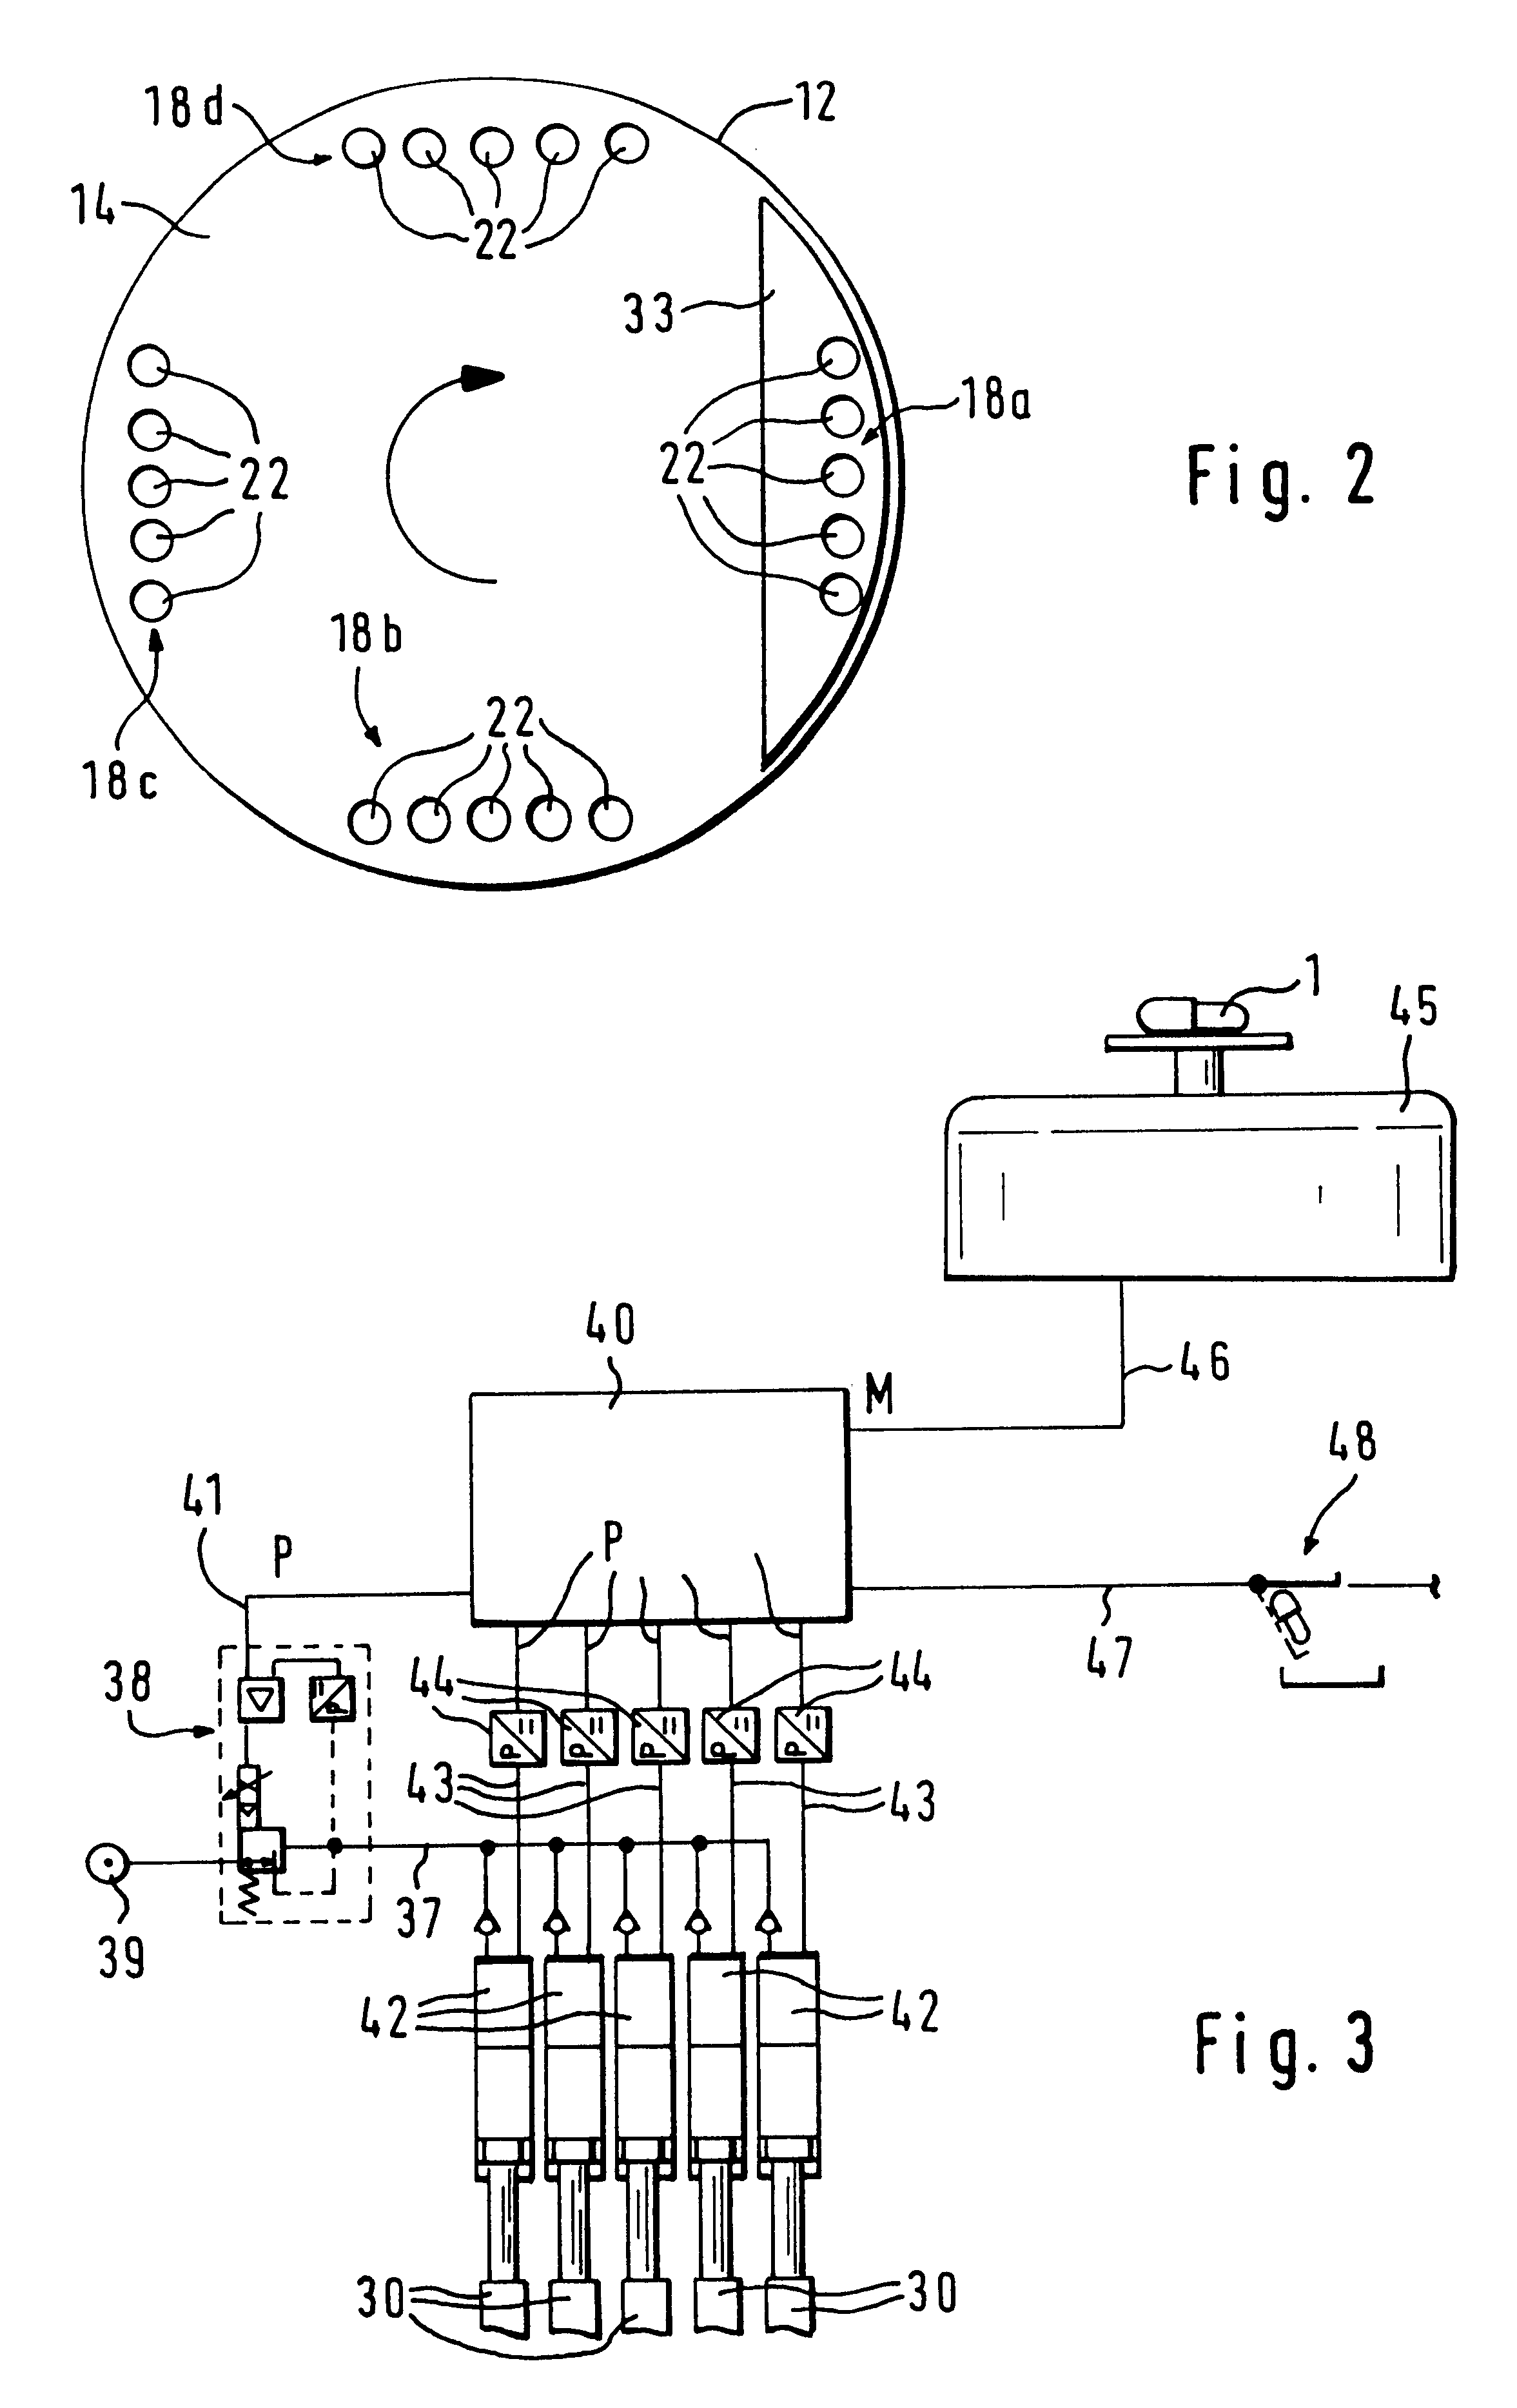 Apparatus for metering and dispensing powder into hard gelatin capsules or the like